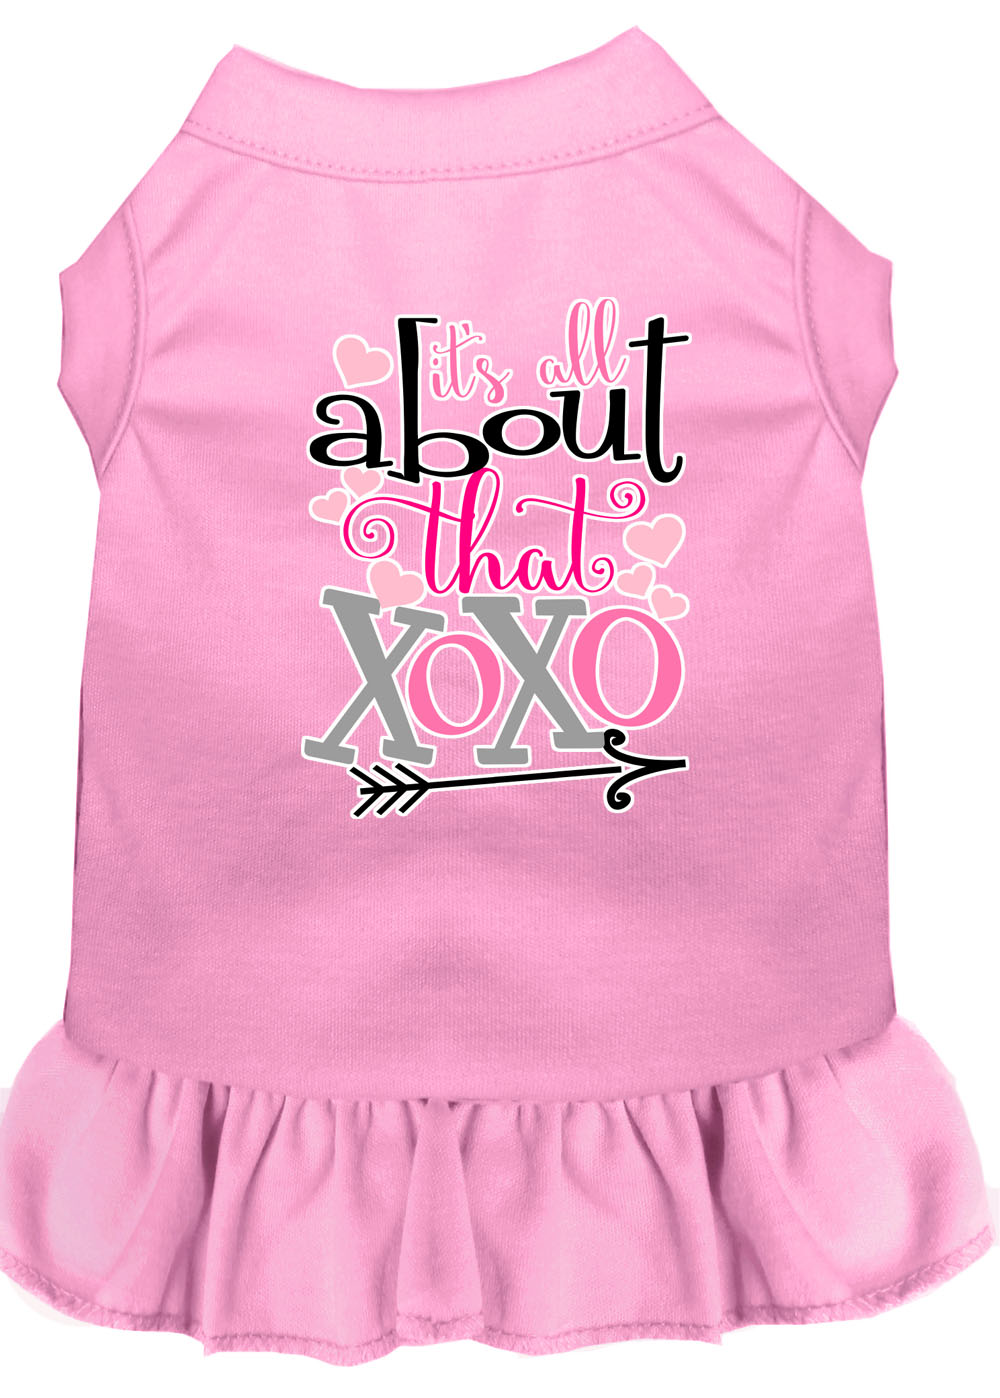 All about the XOXO Screen Print Dog Dress Light Pink 4X